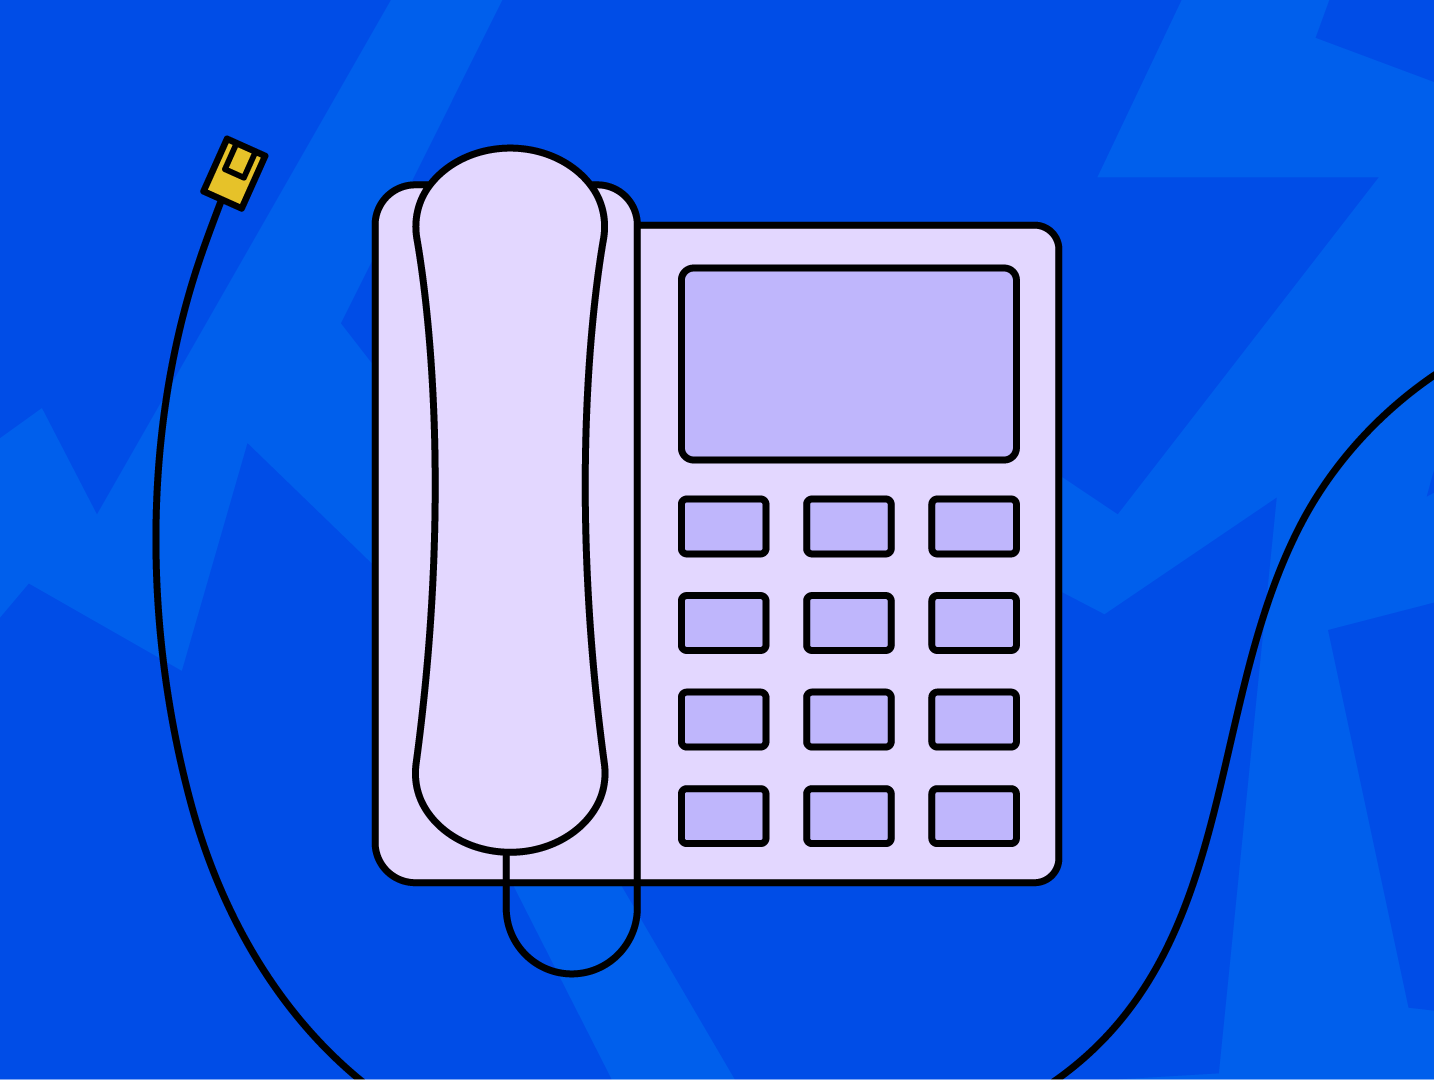 Illustration of a business phone and ethernet cable